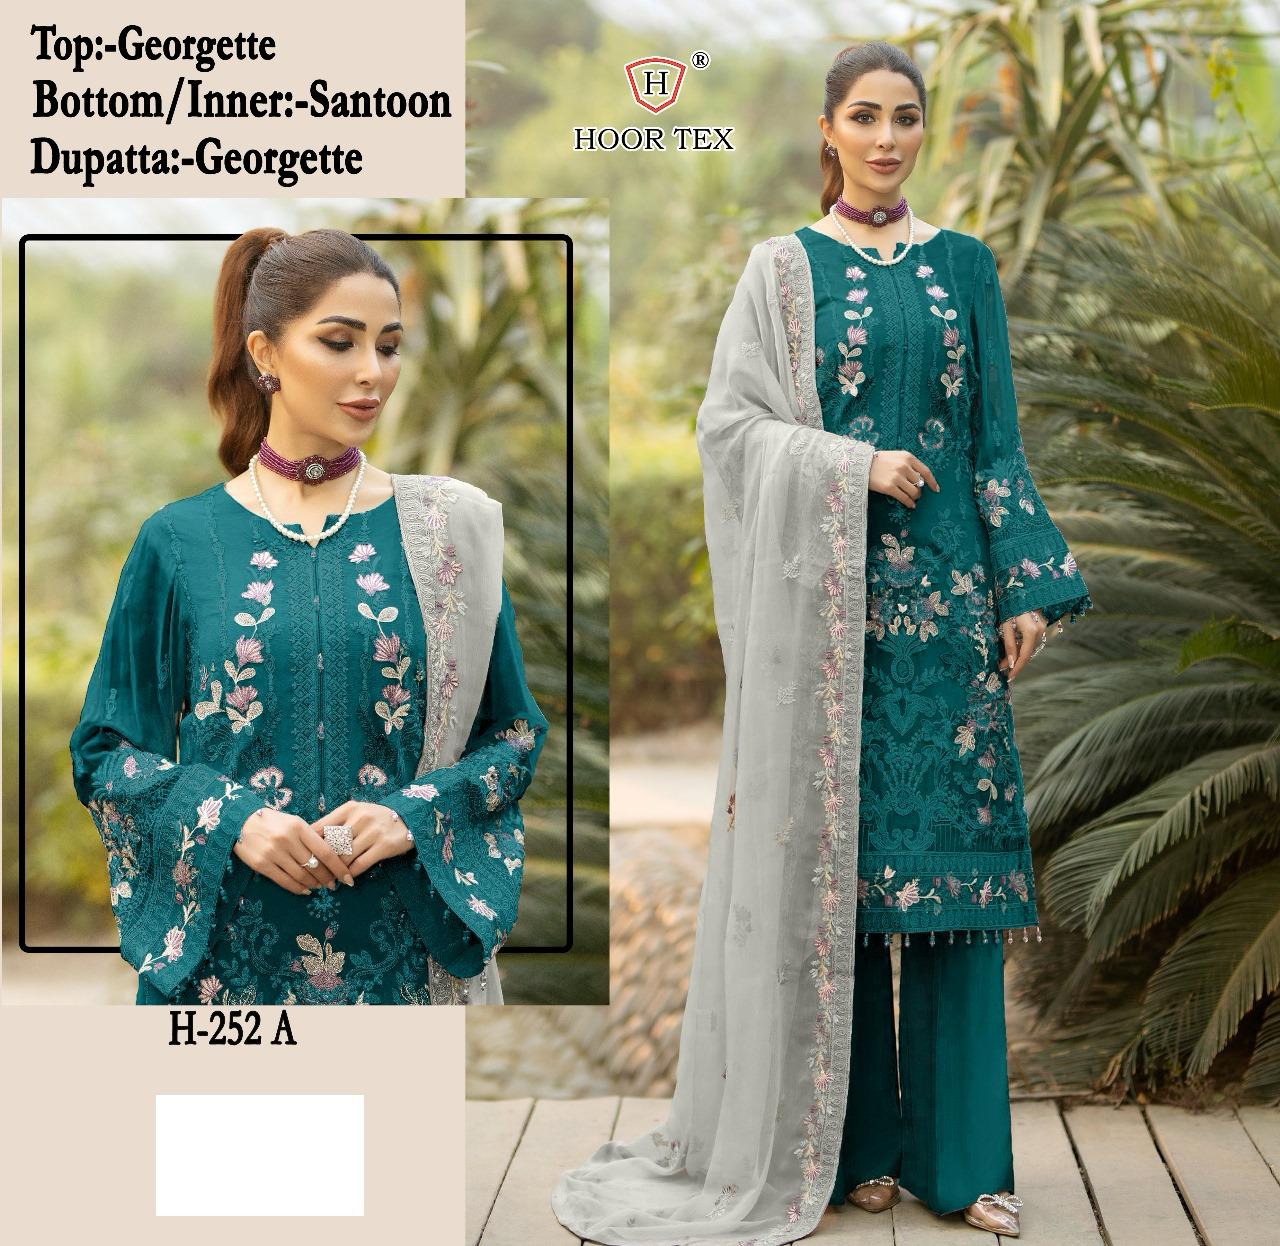 HOOR TEX H 252 A PAKISTANI SUITS IN INDIA